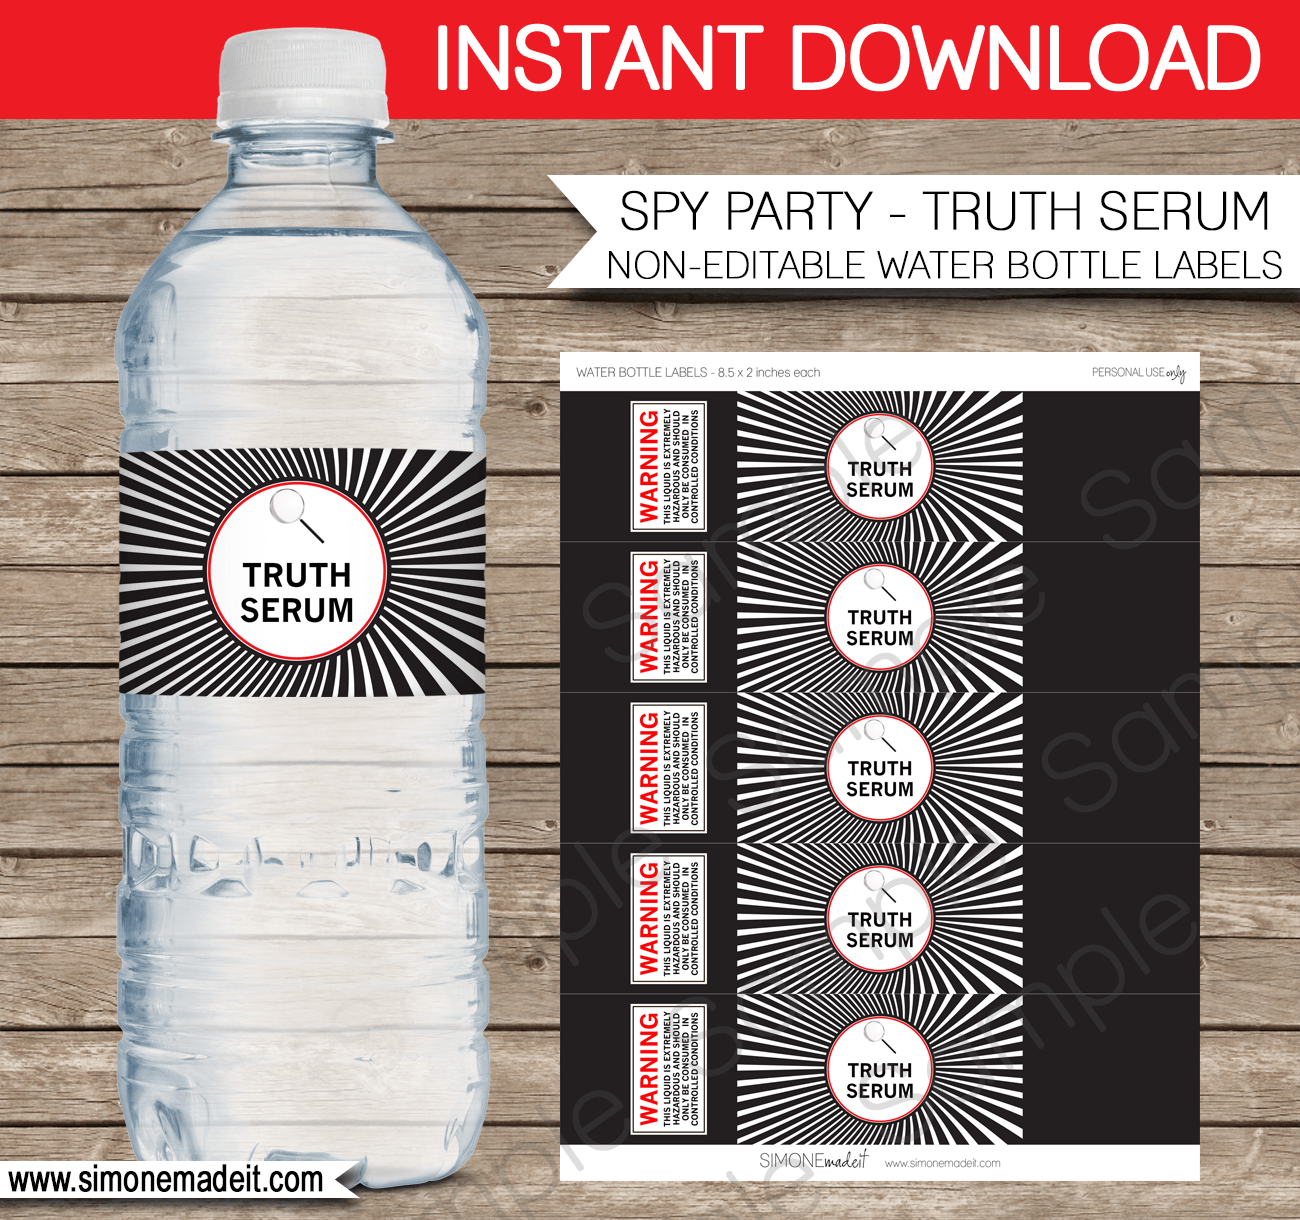 Printable Spy Party Water Bottle Labels Template | Truth Serum | Secret Agent Birthday Party | $3.00 INSTANT DOWNLOAD via SIMONEmadeit.com